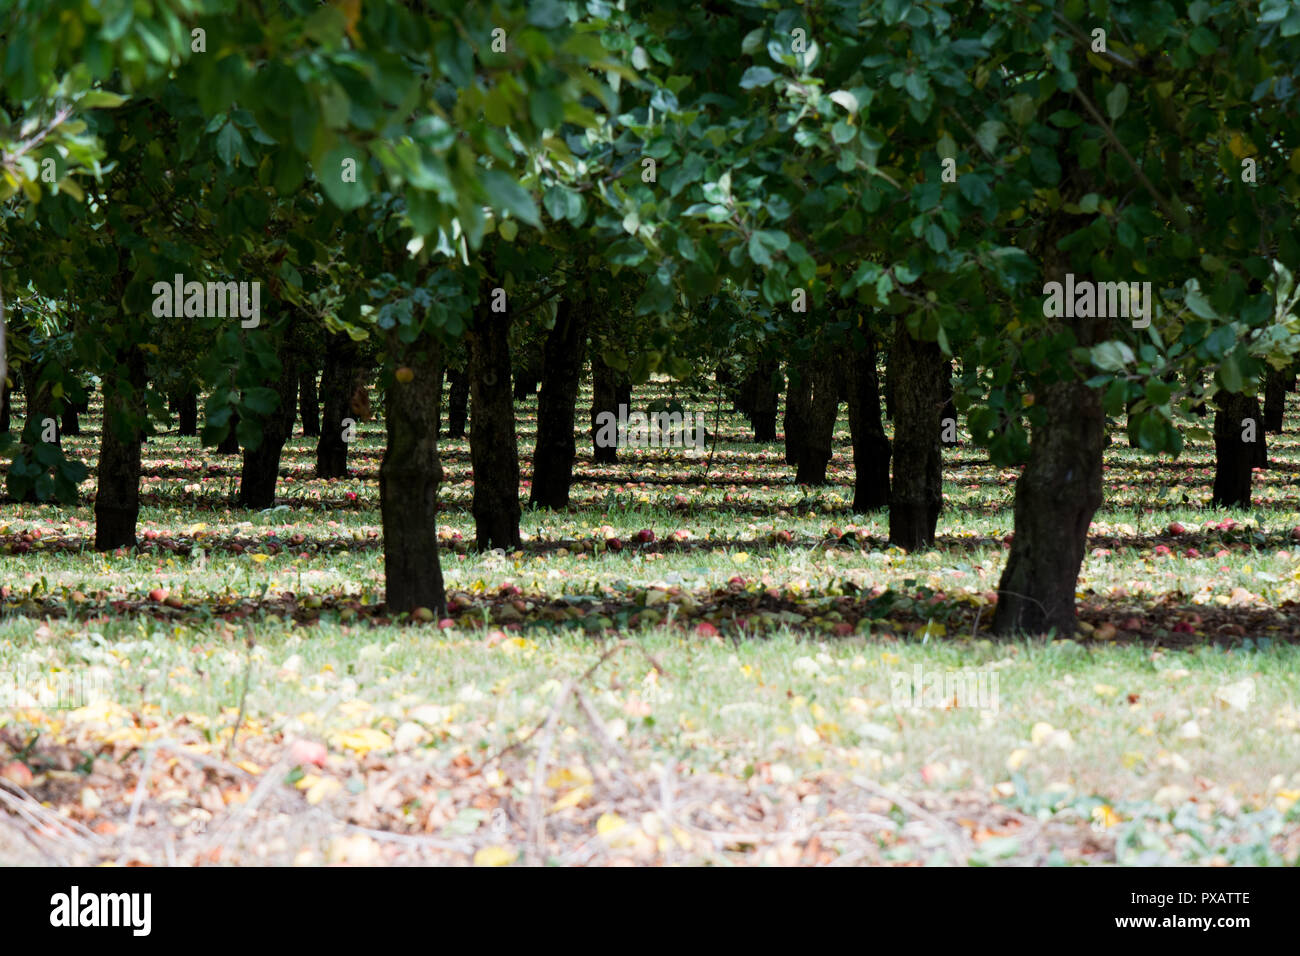 Cider Apple Orchard early morning with sun and shade patterning Stock Photo